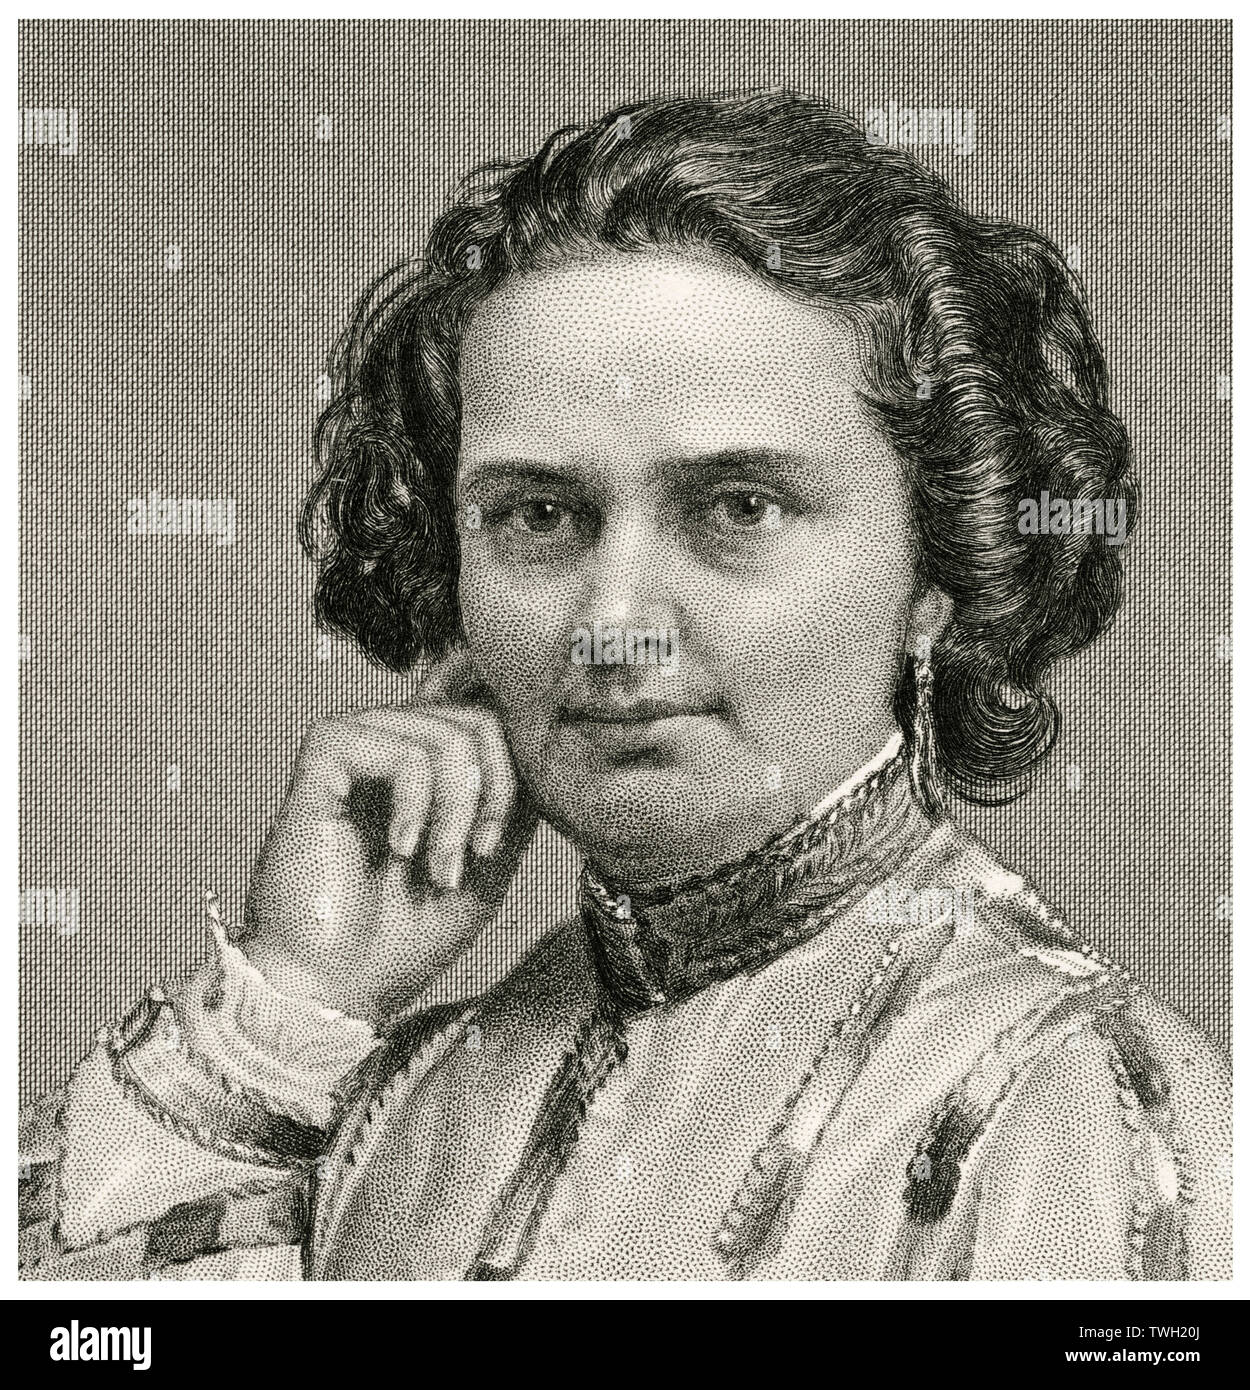 Harriet Hosmer (1830-1908), American Neoclassical Sculptor, Head and Shoulders Portrait, Steel Engraving, Portrait Gallery of Eminent Men and Women of Europe and America by Evert A. Duyckinck, Published by Henry J. Johnson, Johnson, Wilson & Company, New York, 1873 Stock Photo